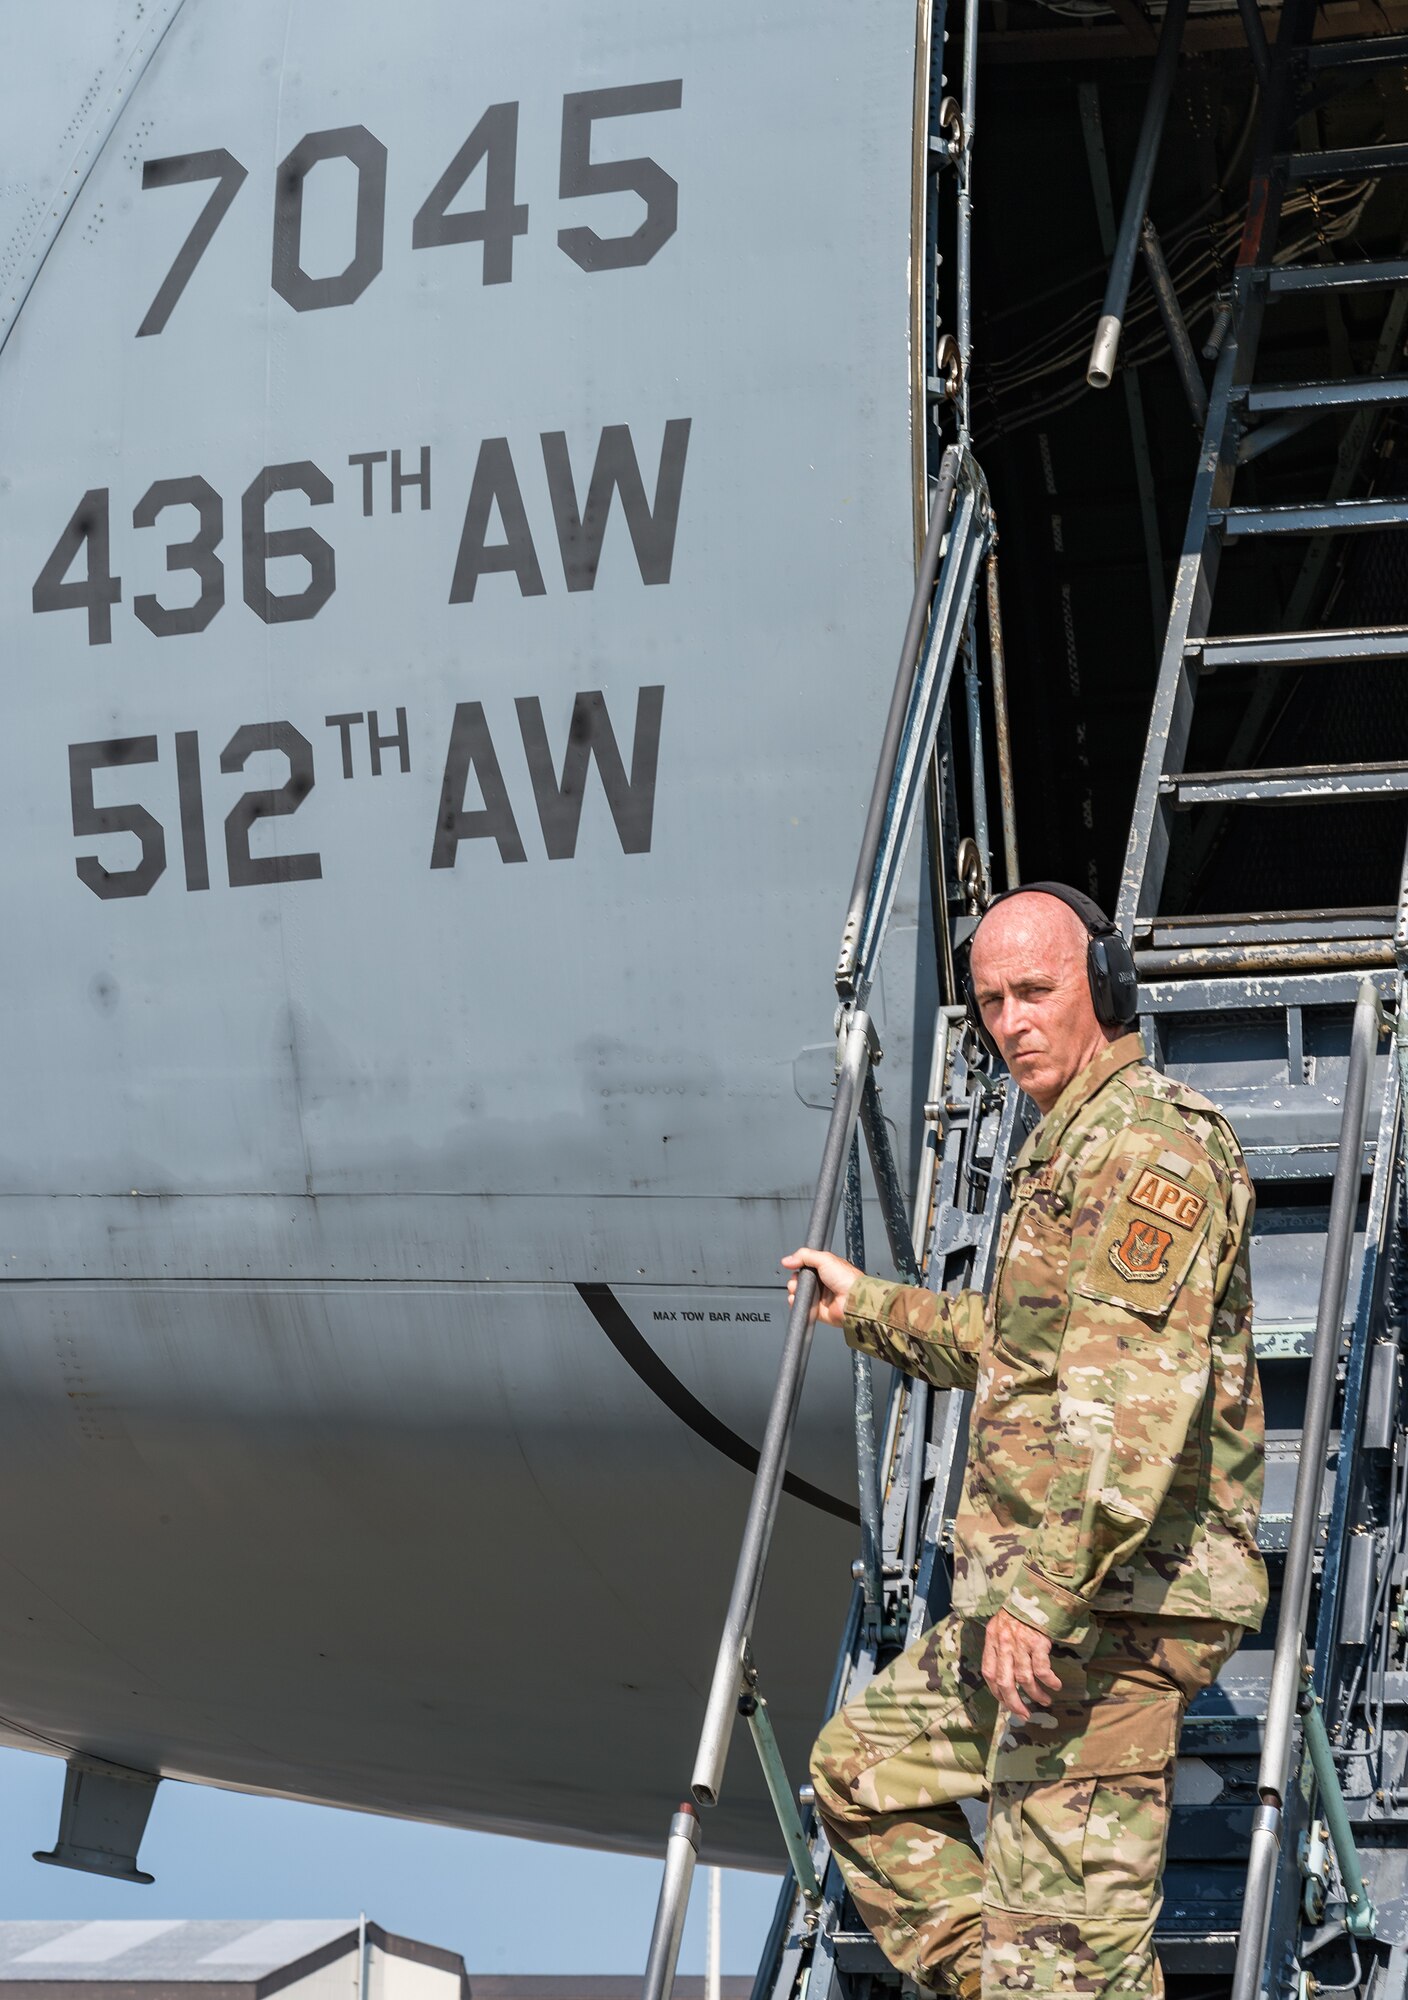 Chief Master Sgt. Bryan “Skip” Ford, 512th Aircraft Maintenance Squadron superintendent, poses for a photo on the crew entrance ladder of a C-5M Super Galaxy at Dover Air Force Base, Delaware, Aug. 25, 2021. Ford recently recalled the events of Sept. 11, 2001, while stationed at Dover AFB and how 9/11 changed how he viewed our relative security and freedom as a nation. (U.S. Air Force photo by Roland Balik)